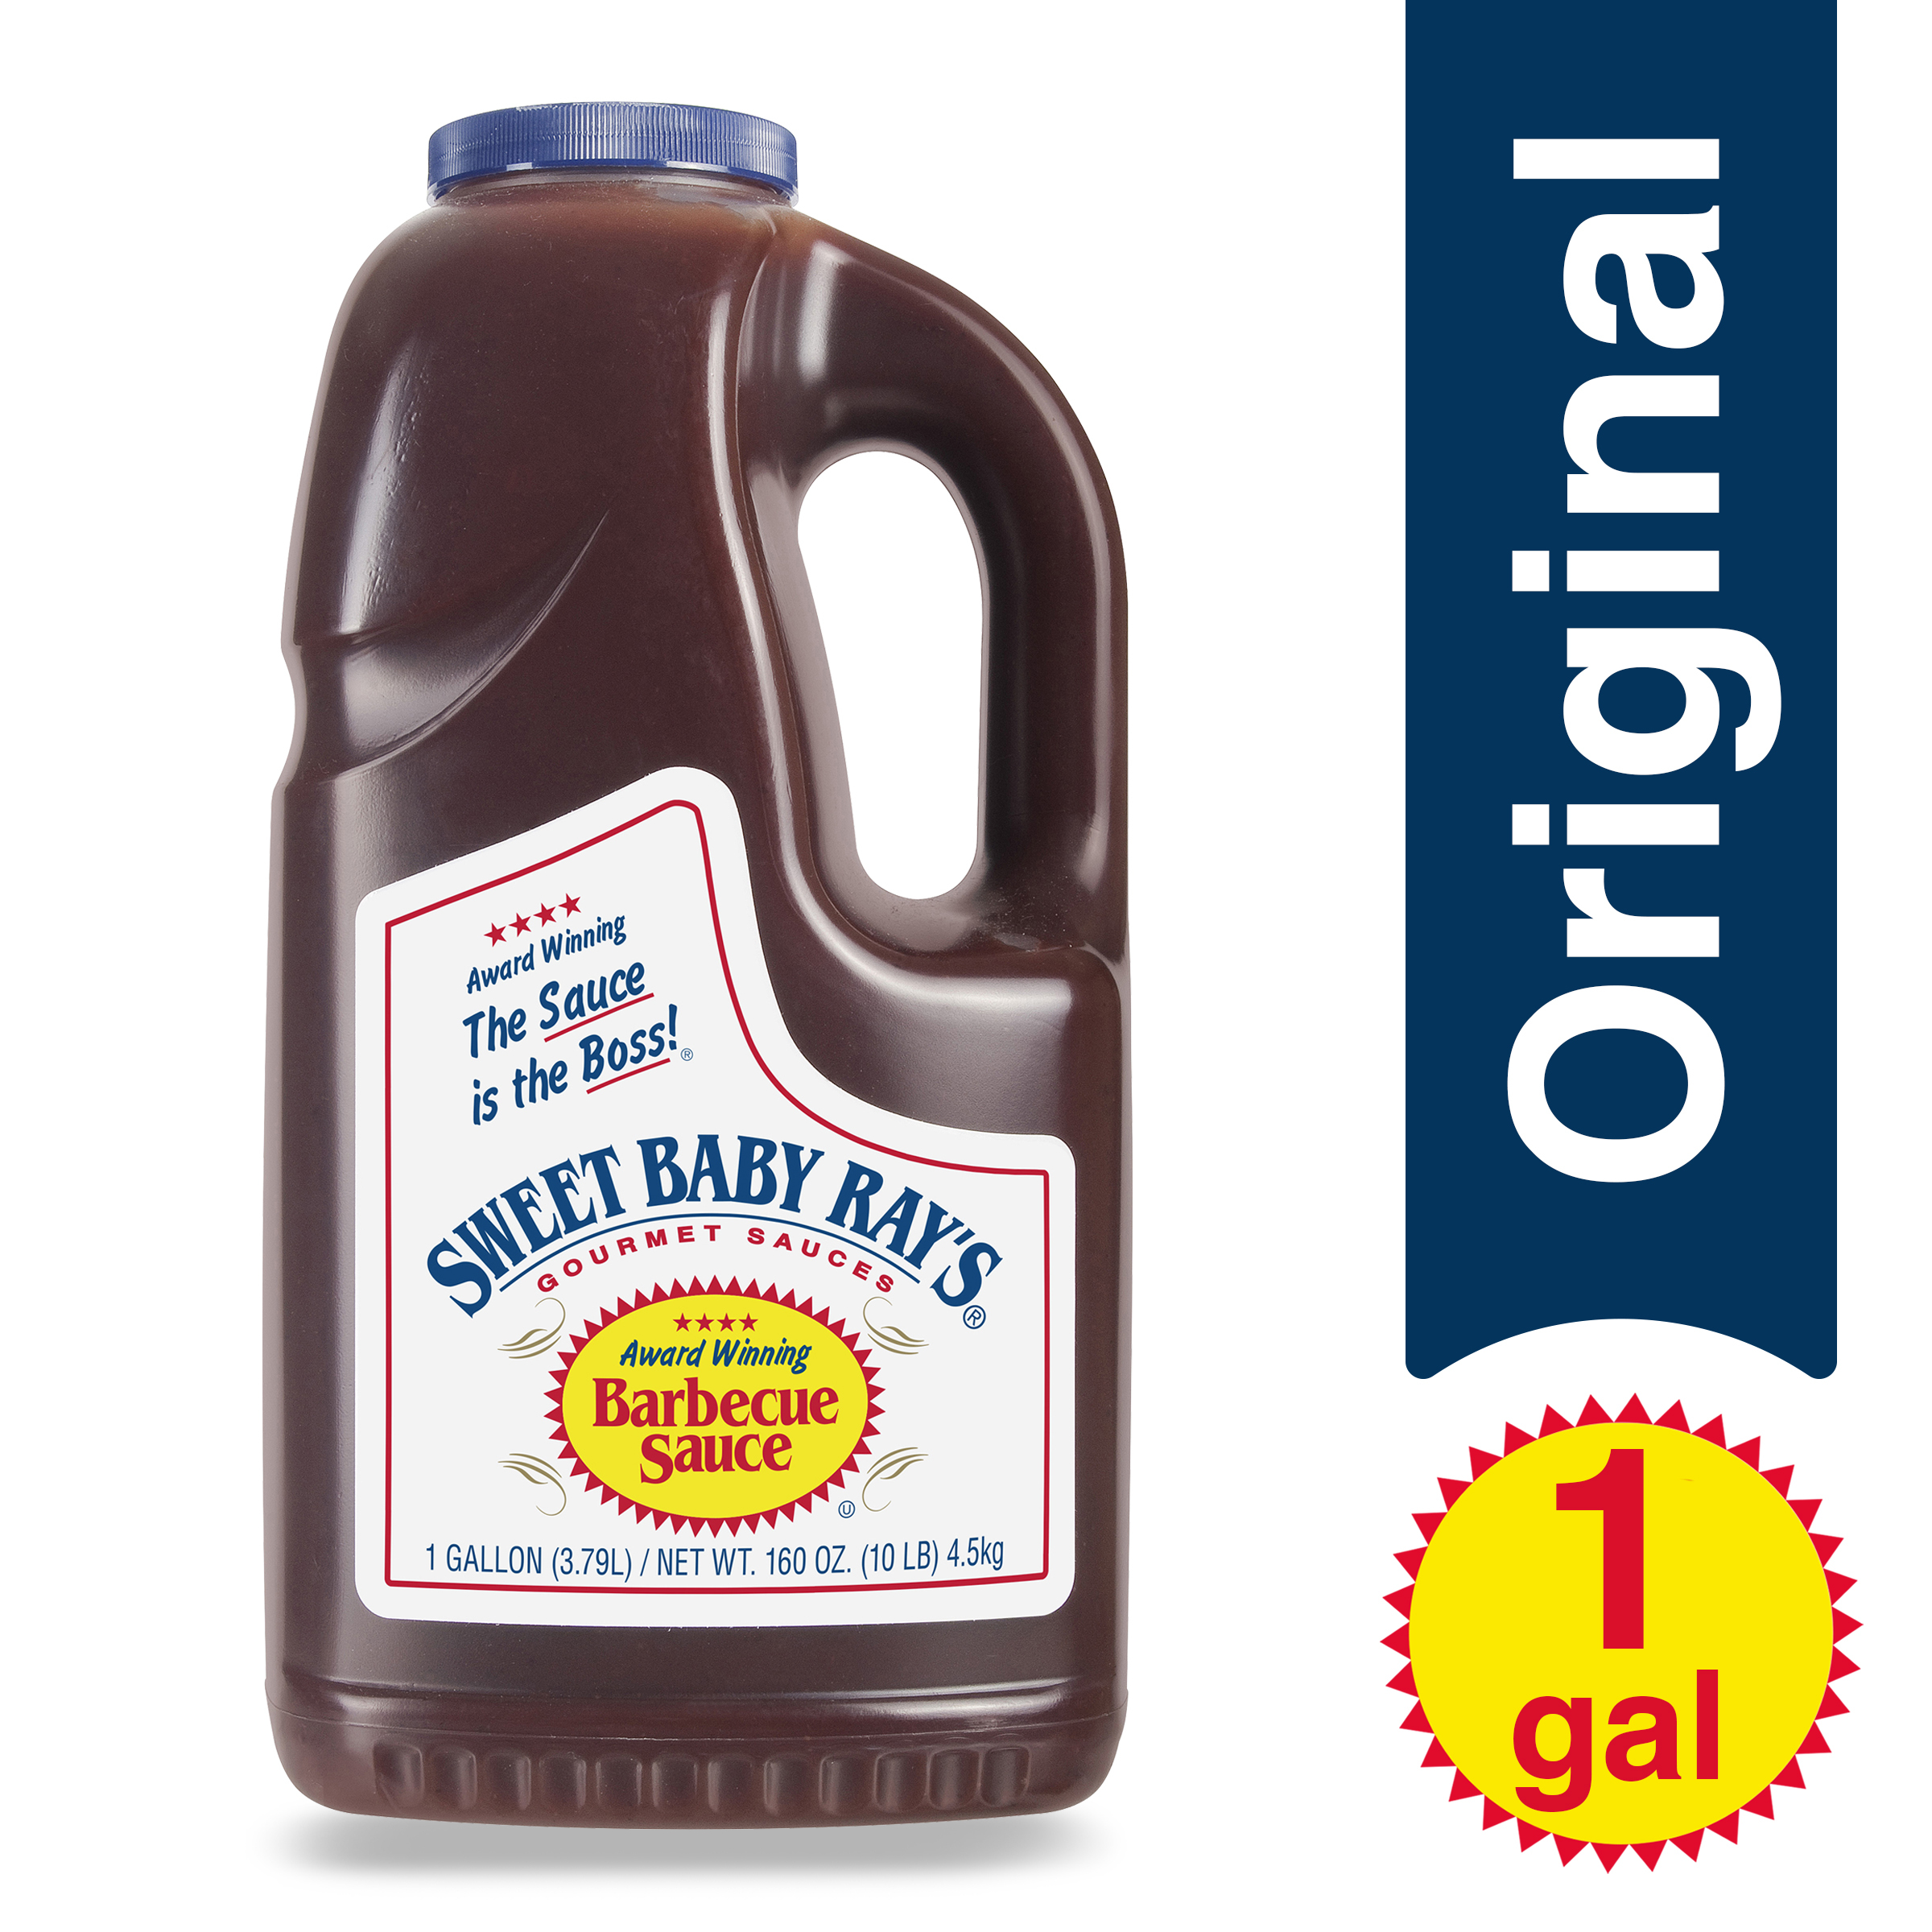 Sweet Baby Ray's Original Barbecue Sauce 1 gal - image 1 of 4